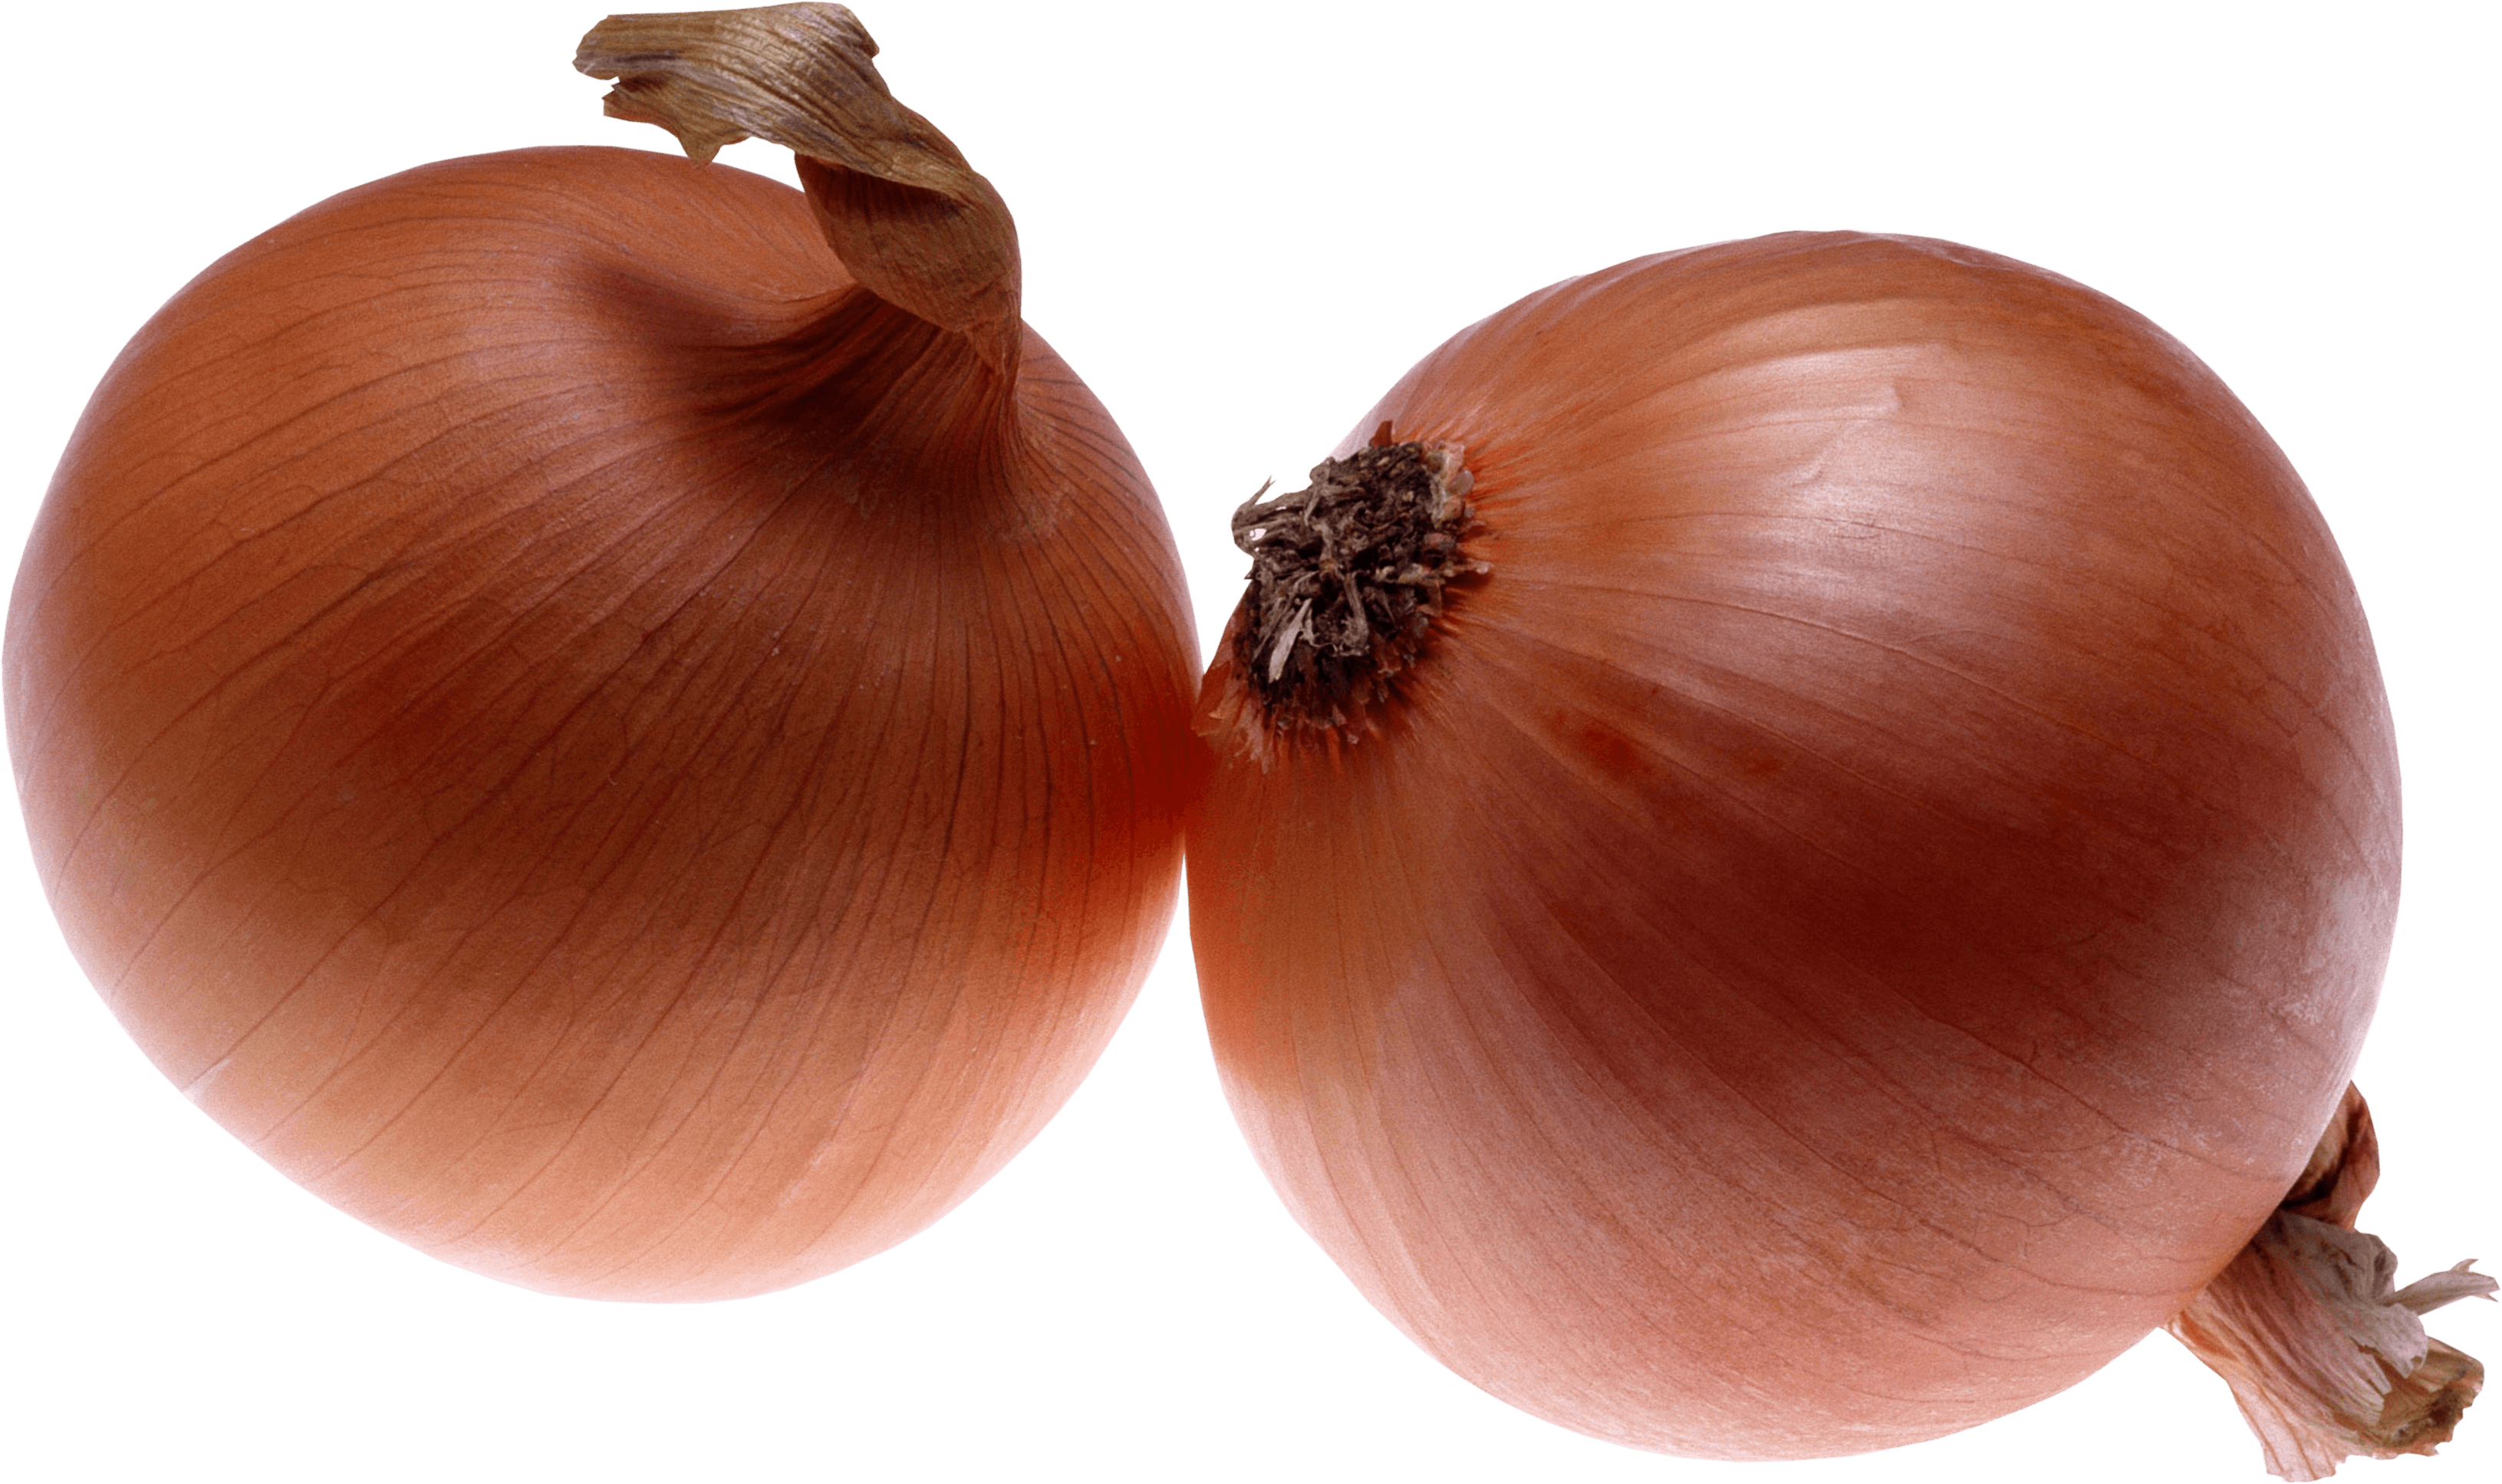 Onion Png Image PNG Image